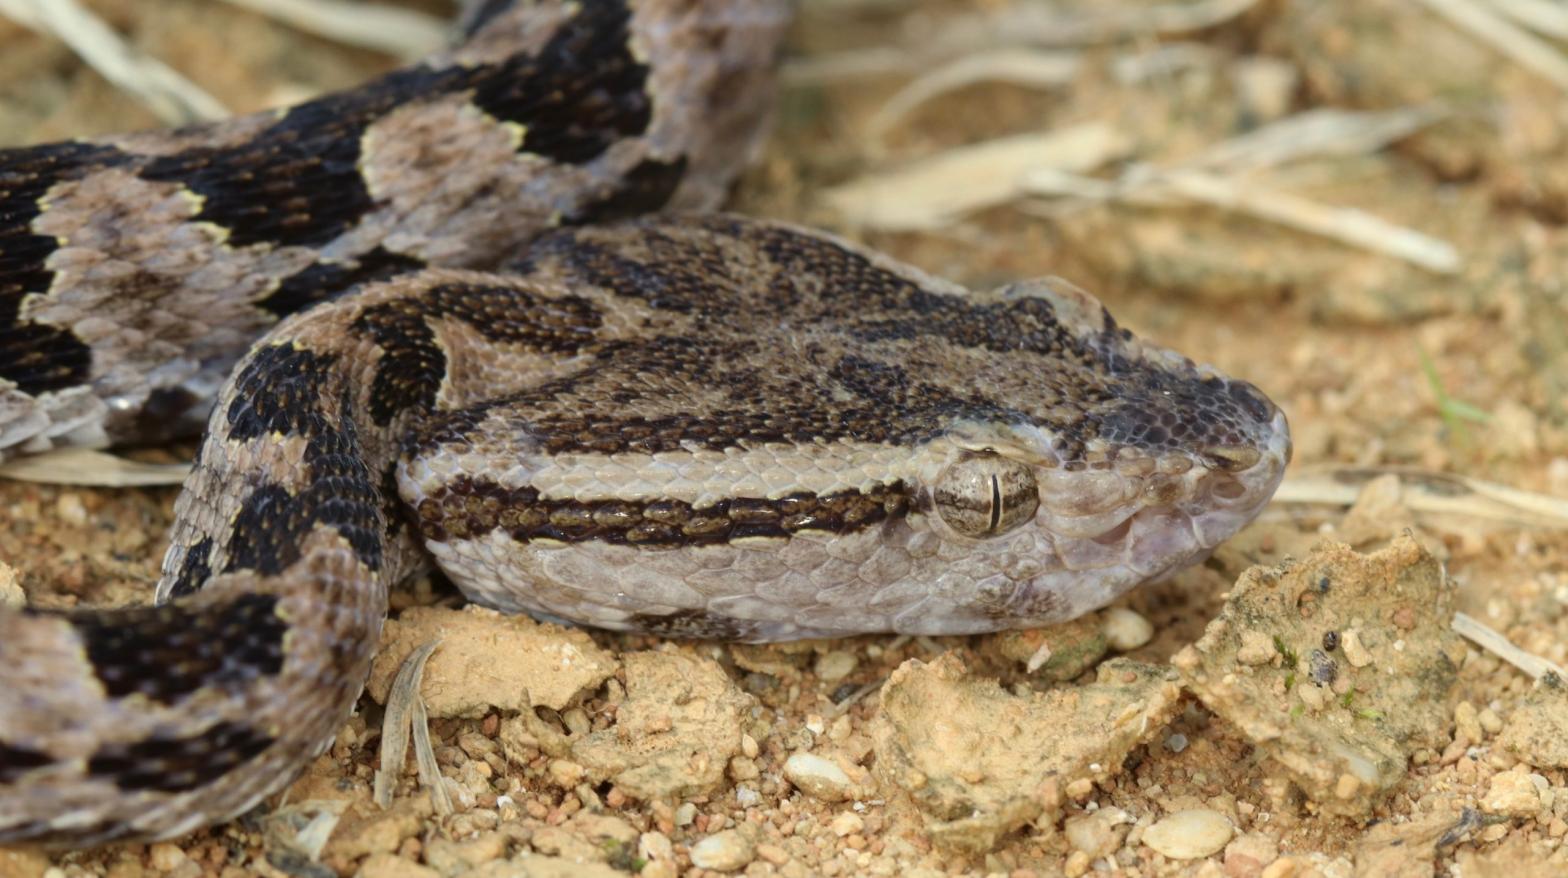 The Taiwan habu has venom glands that are rooted in a distant genetic past. (Image: OIST/Steven Aird)